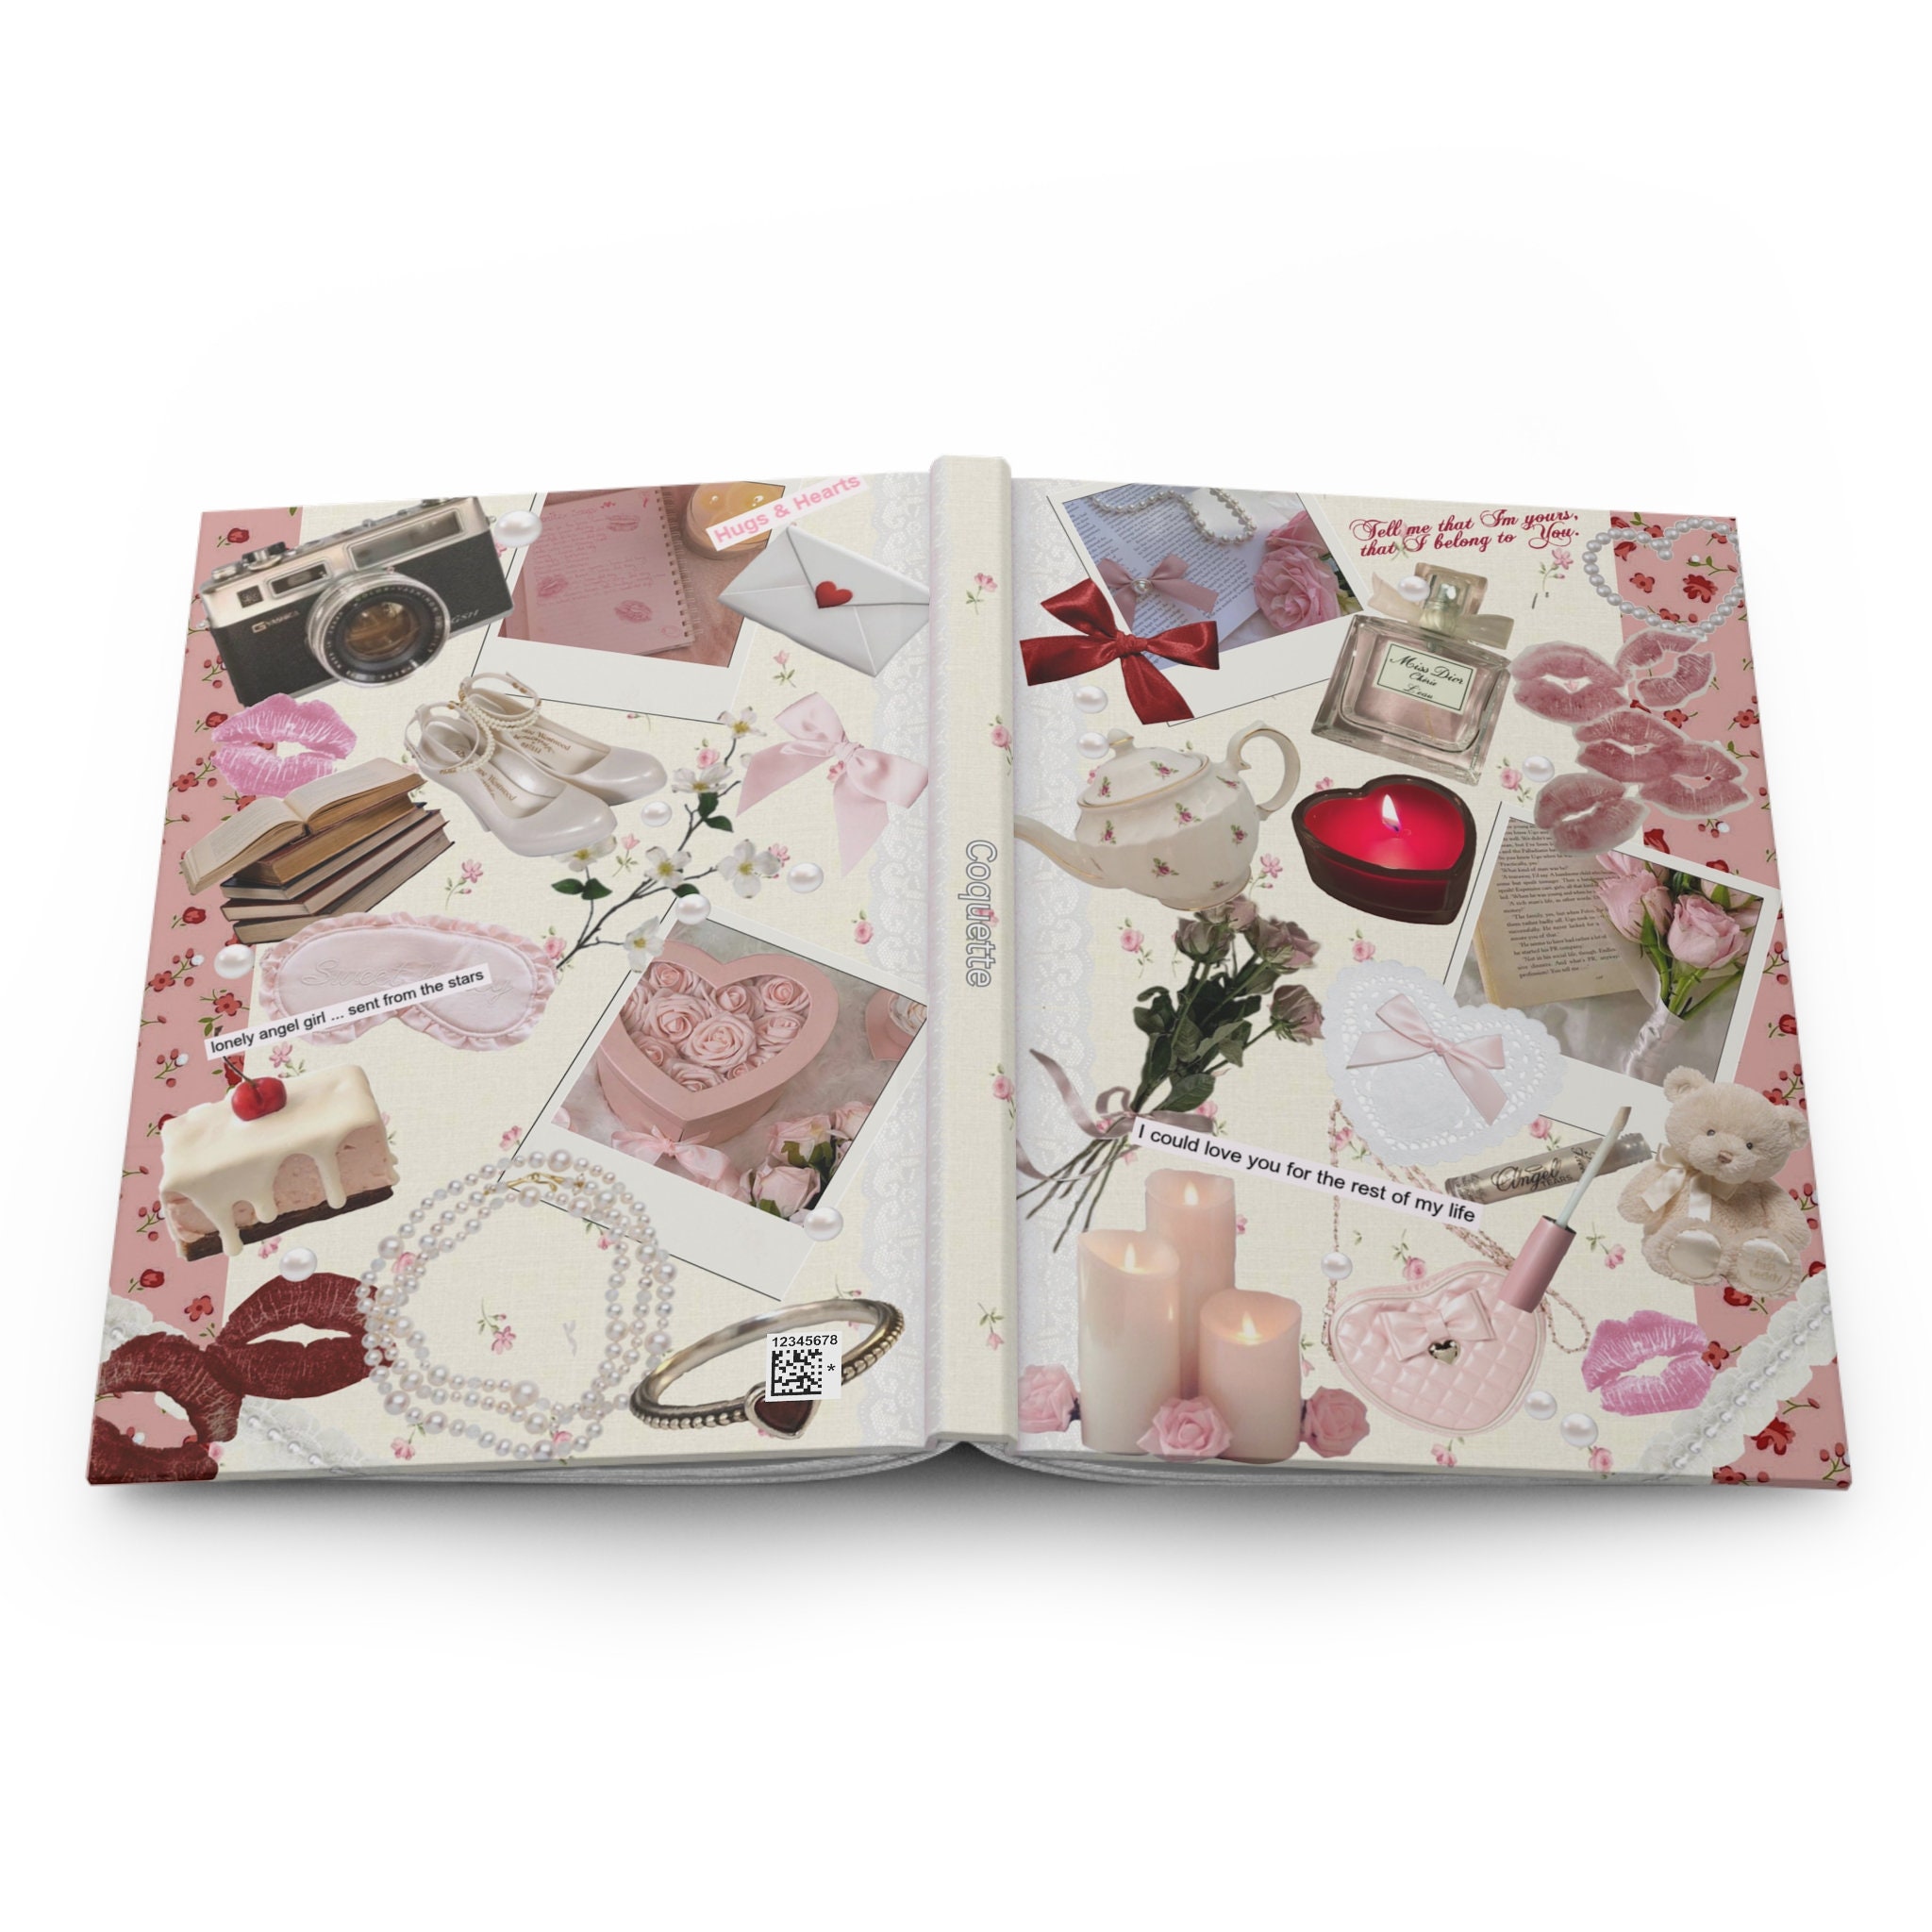 Take care of my heart coquette journal inspo  Pretty journals, Flower  jewellery for mehndi, Ladybug art